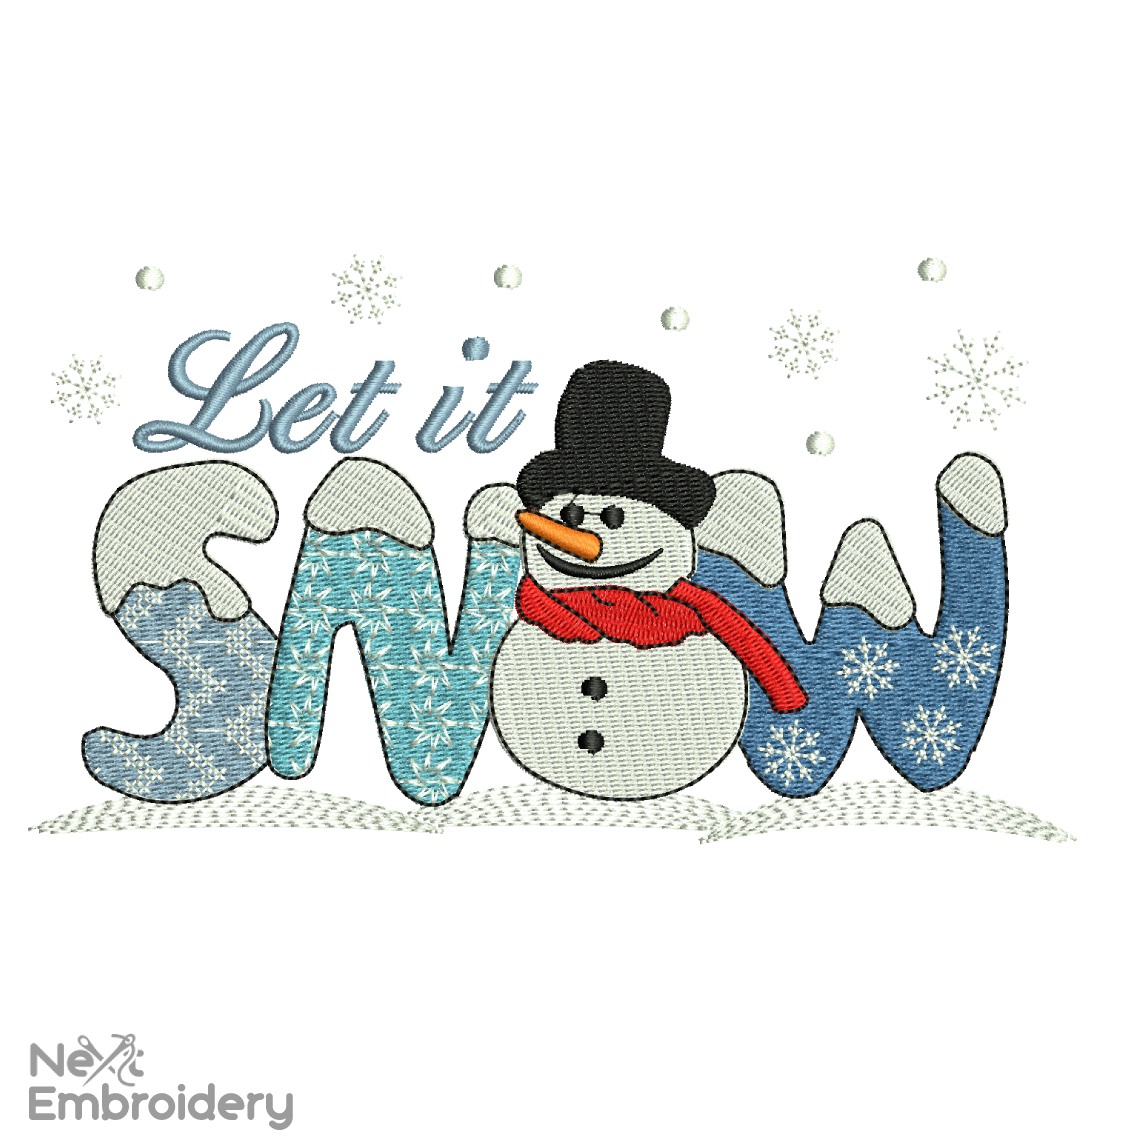 Let it Snow Embroidery Design, Snowman Christmas Embroidery Designs